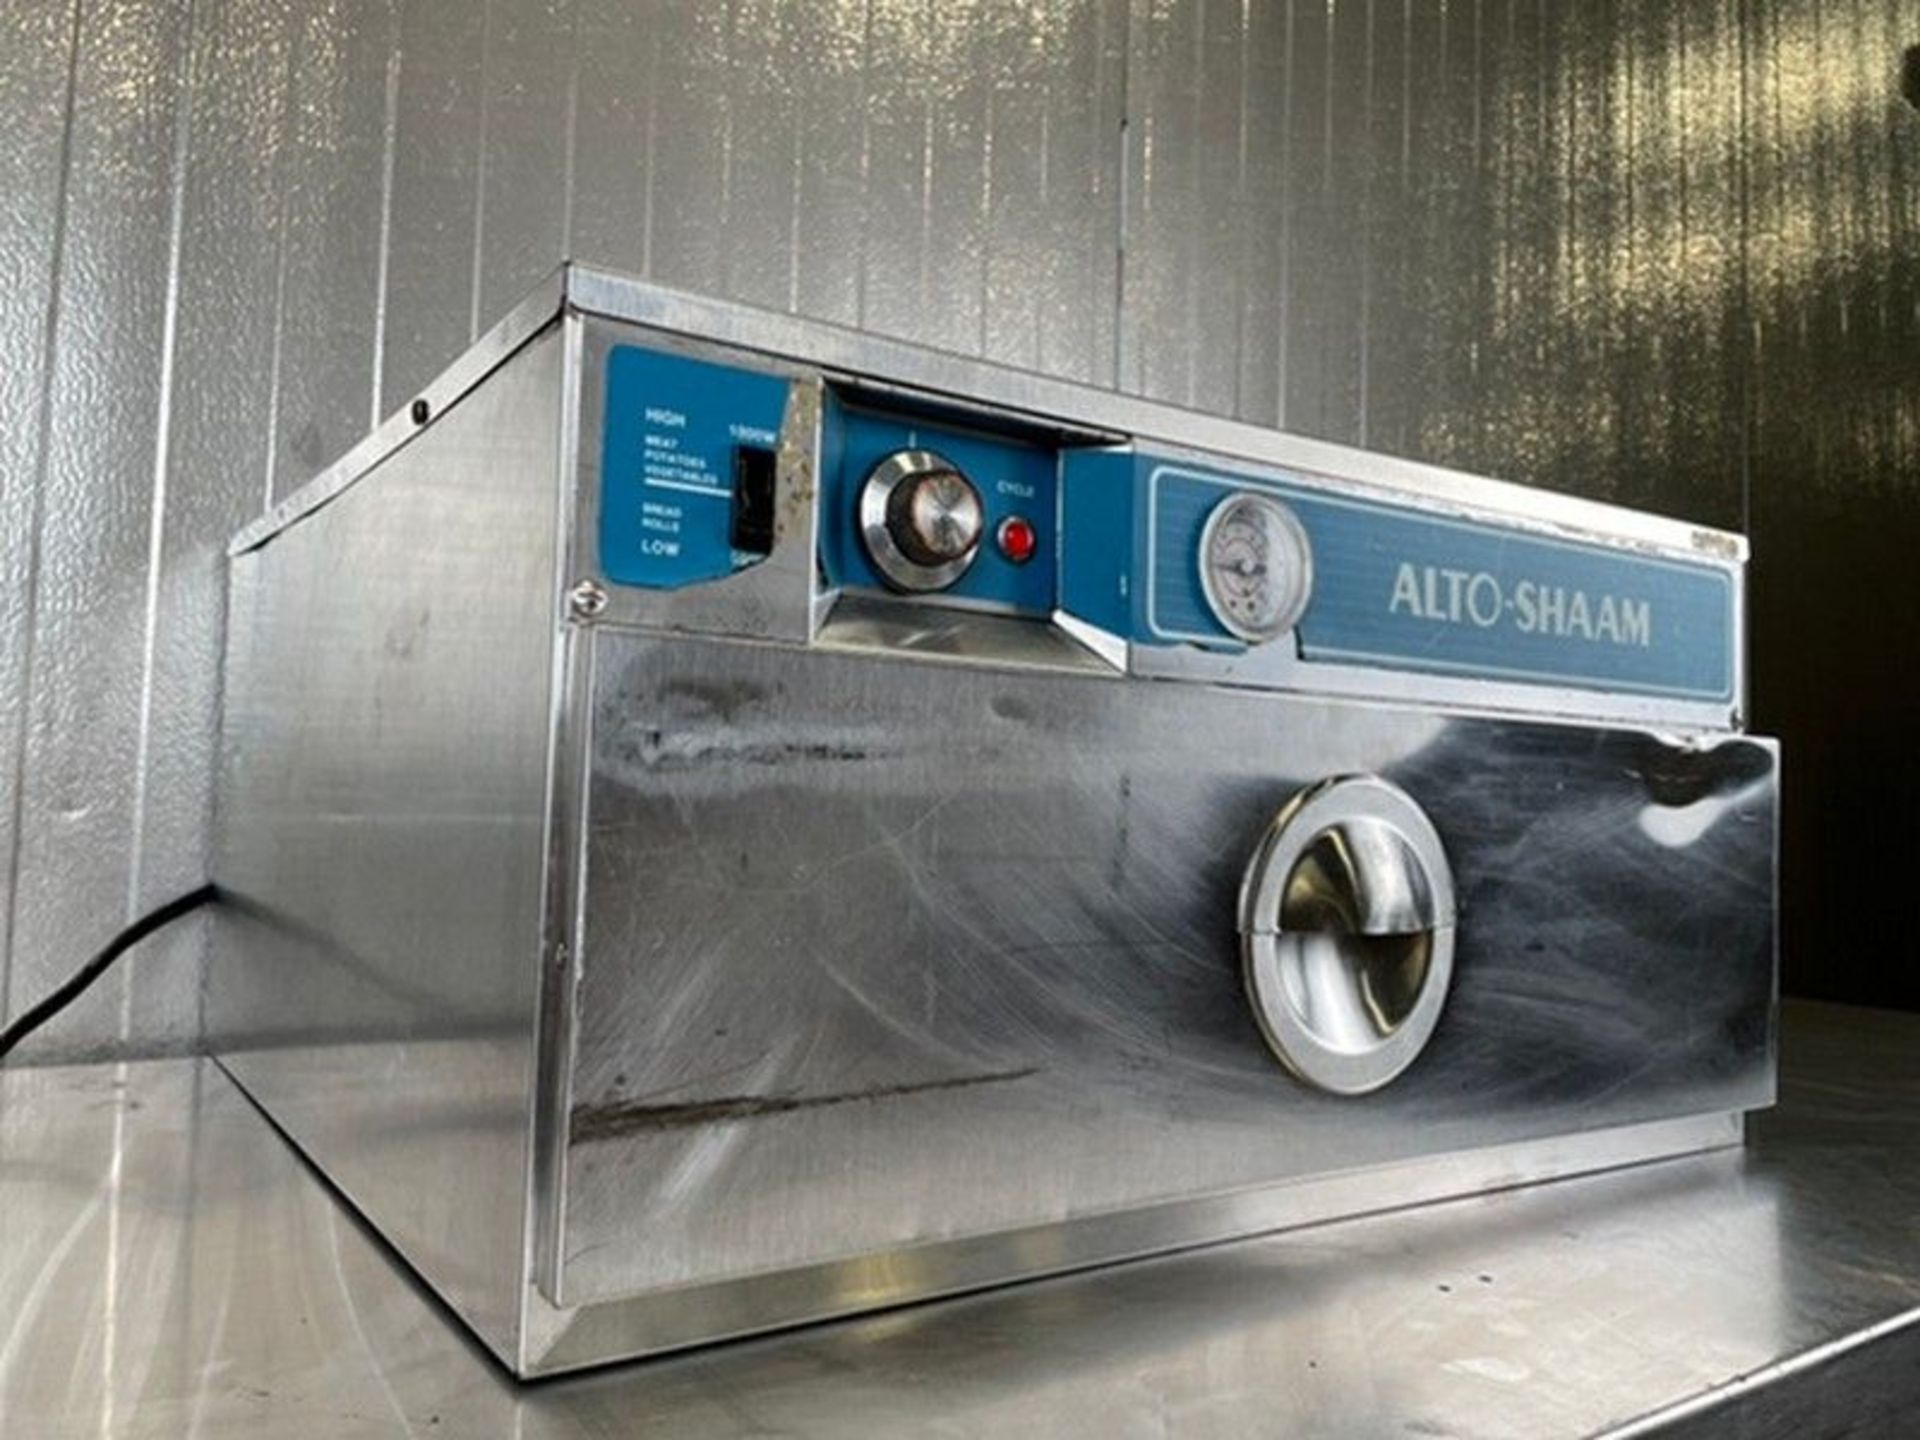 Auto-Sham Food Warmer, 110 Volts, 1 Phase, S/S Design (Auction ID 90c655c1) (Handling, Loading, & - Image 3 of 5